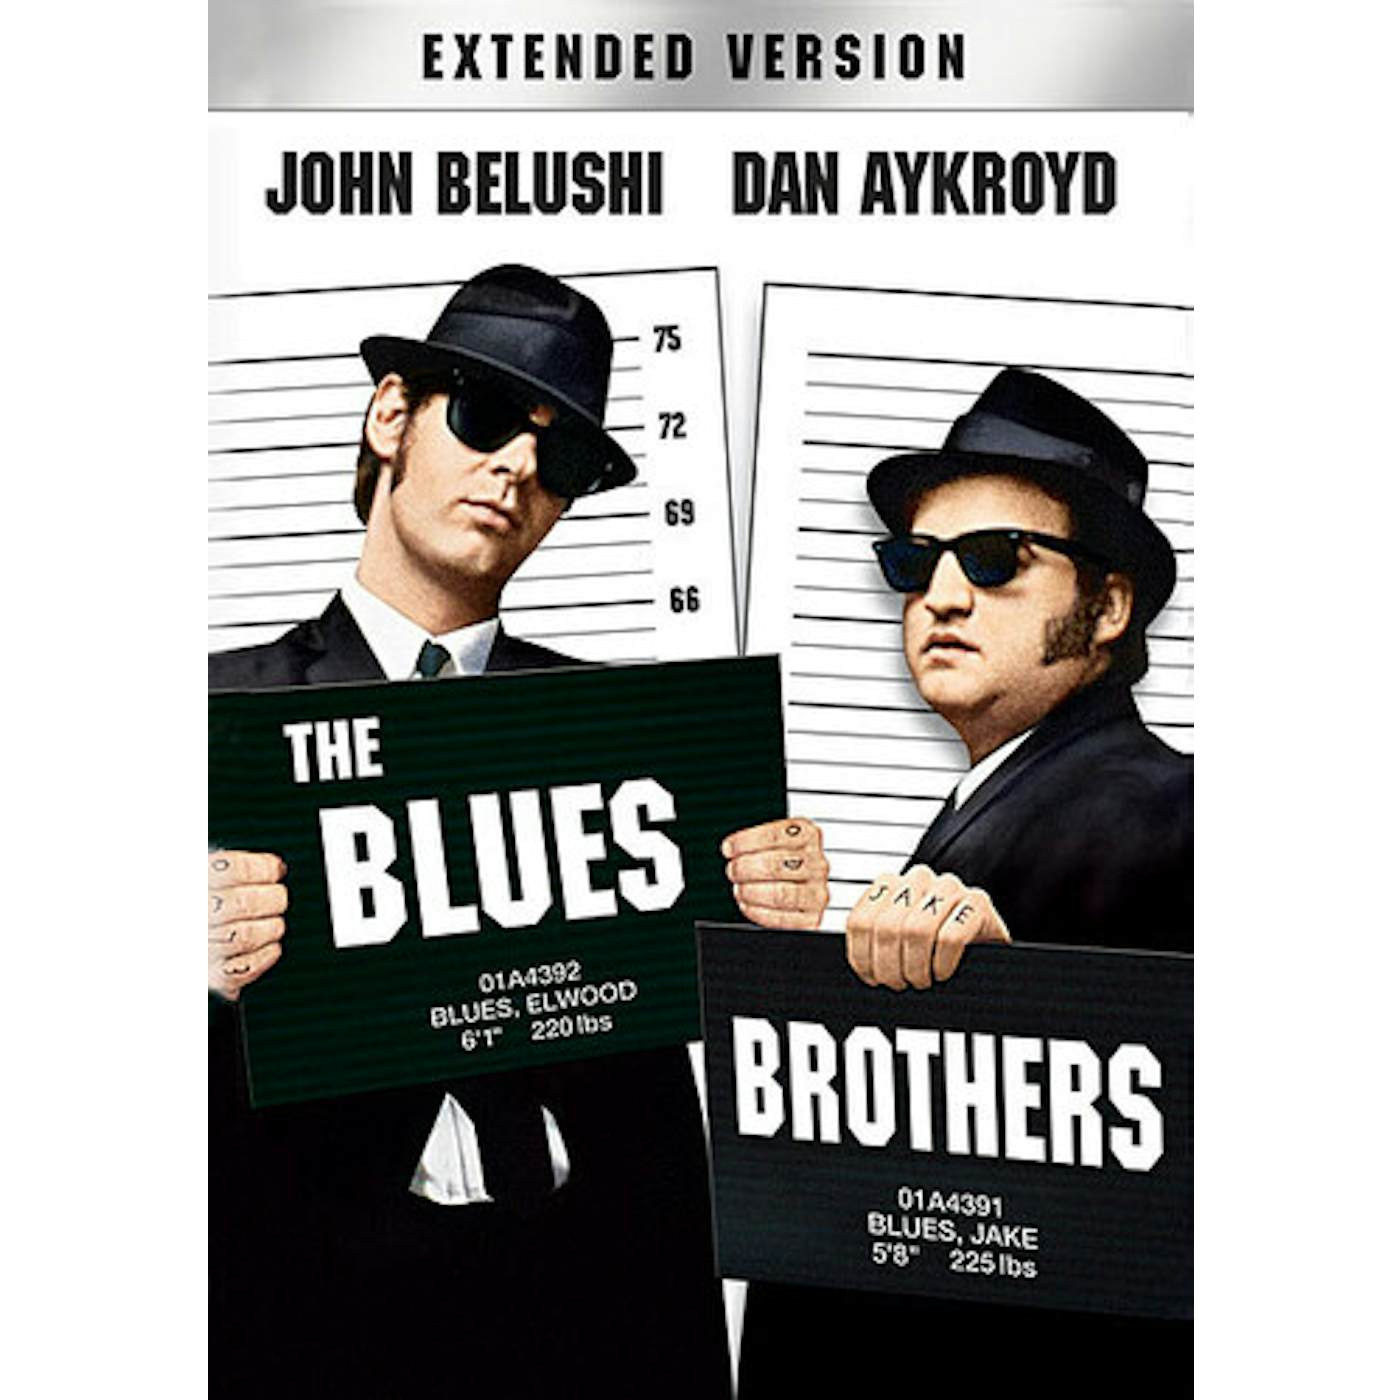 The Blues & Brothers DVD